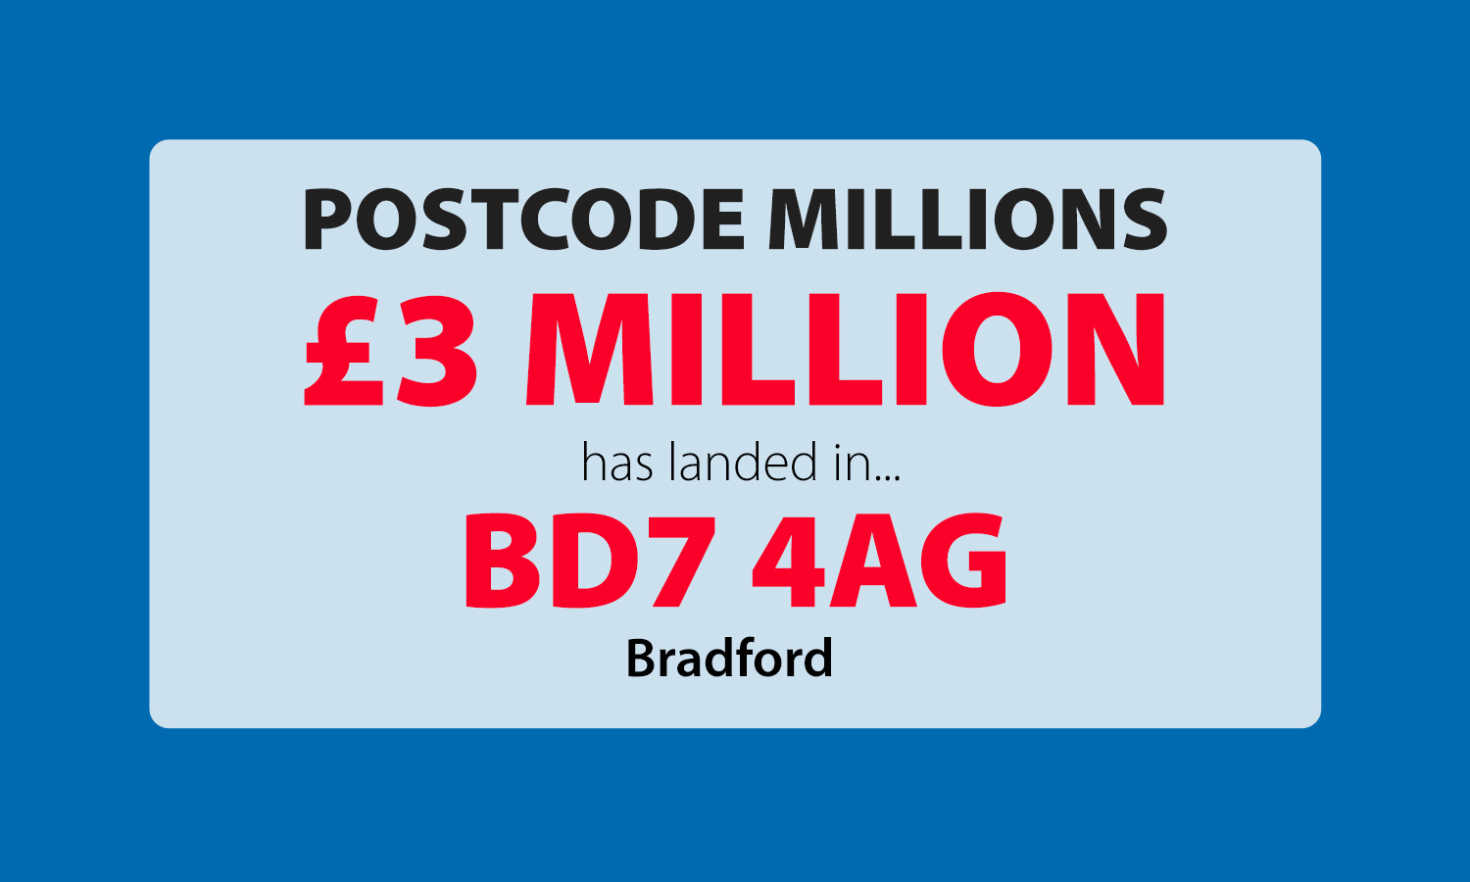 Four Bradford residents in postcode BD7 4AG have lots to be glad about after scooping an amazing £280,724 each